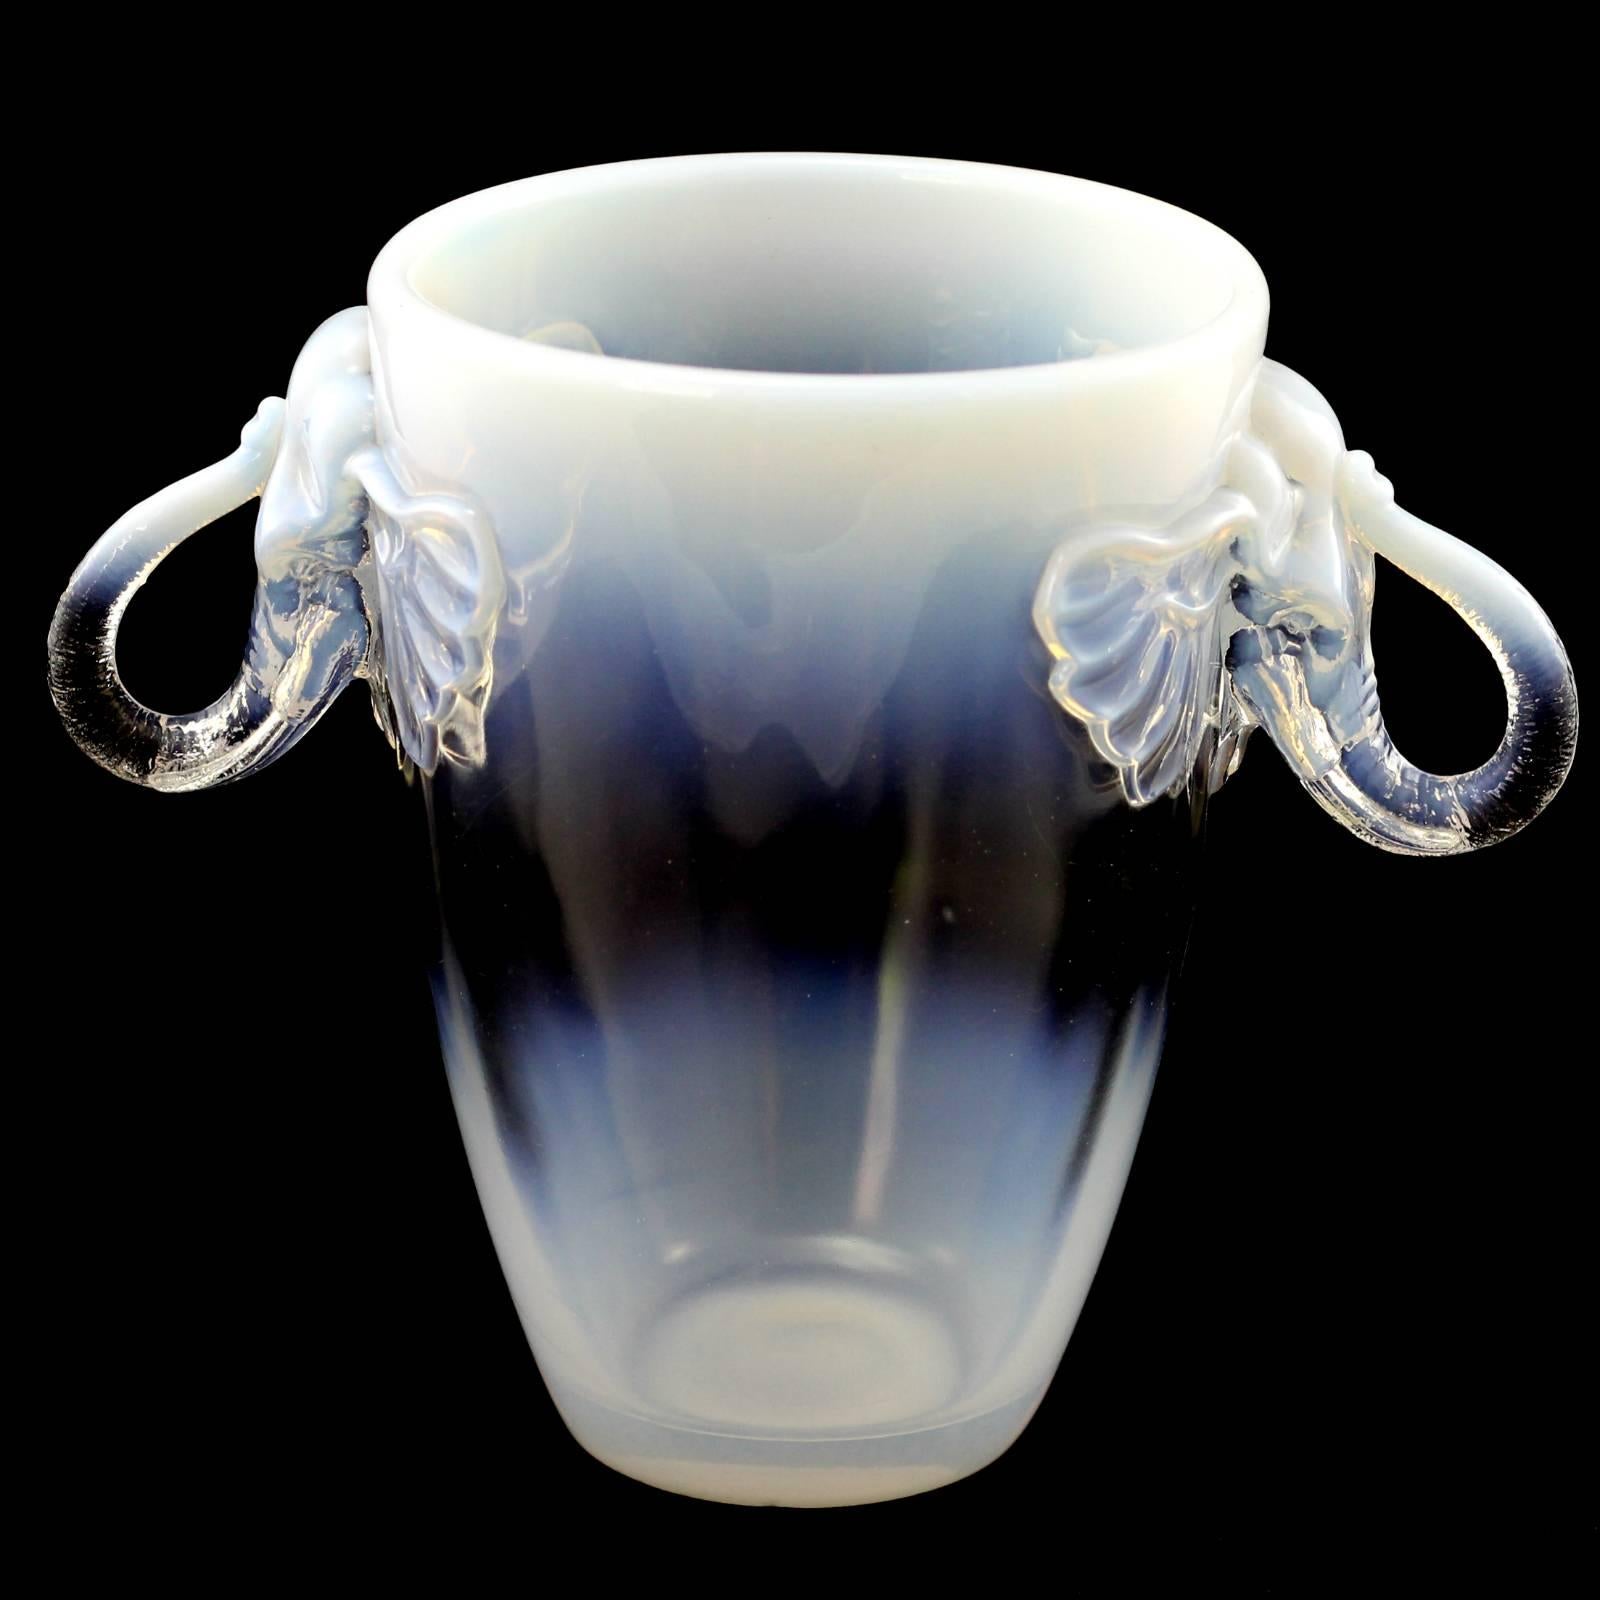 This whimsical vase doubles nicely as a champagne bucket with handles modelled as elephants with flared ears and a rearing trunk. The opalescent quality of the class receeds to a clear glass in the centre before fading again to opalescent for the